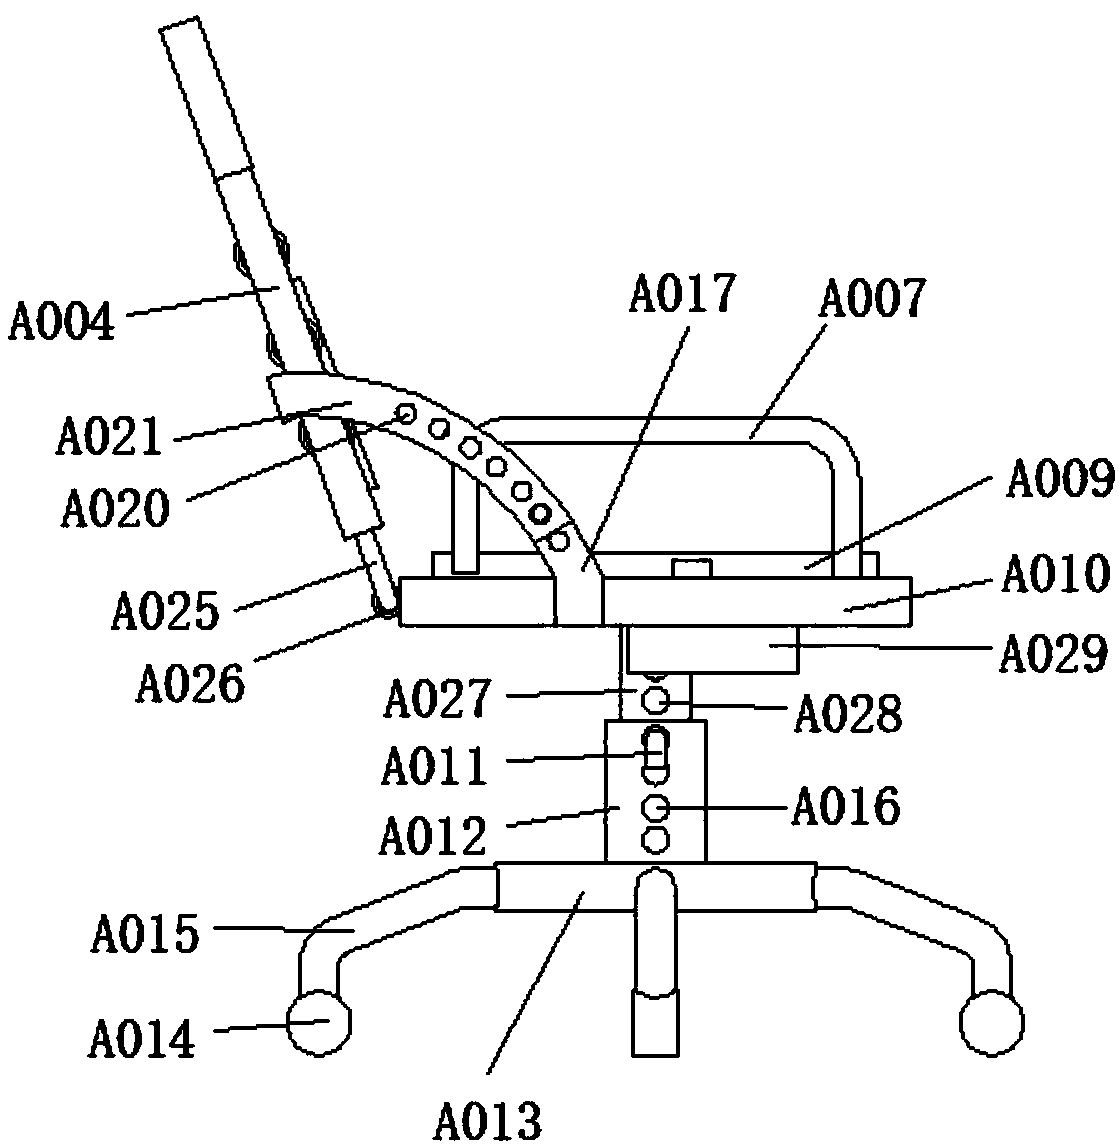 Treatment chair for orthopedics spinal injury with treatment effect